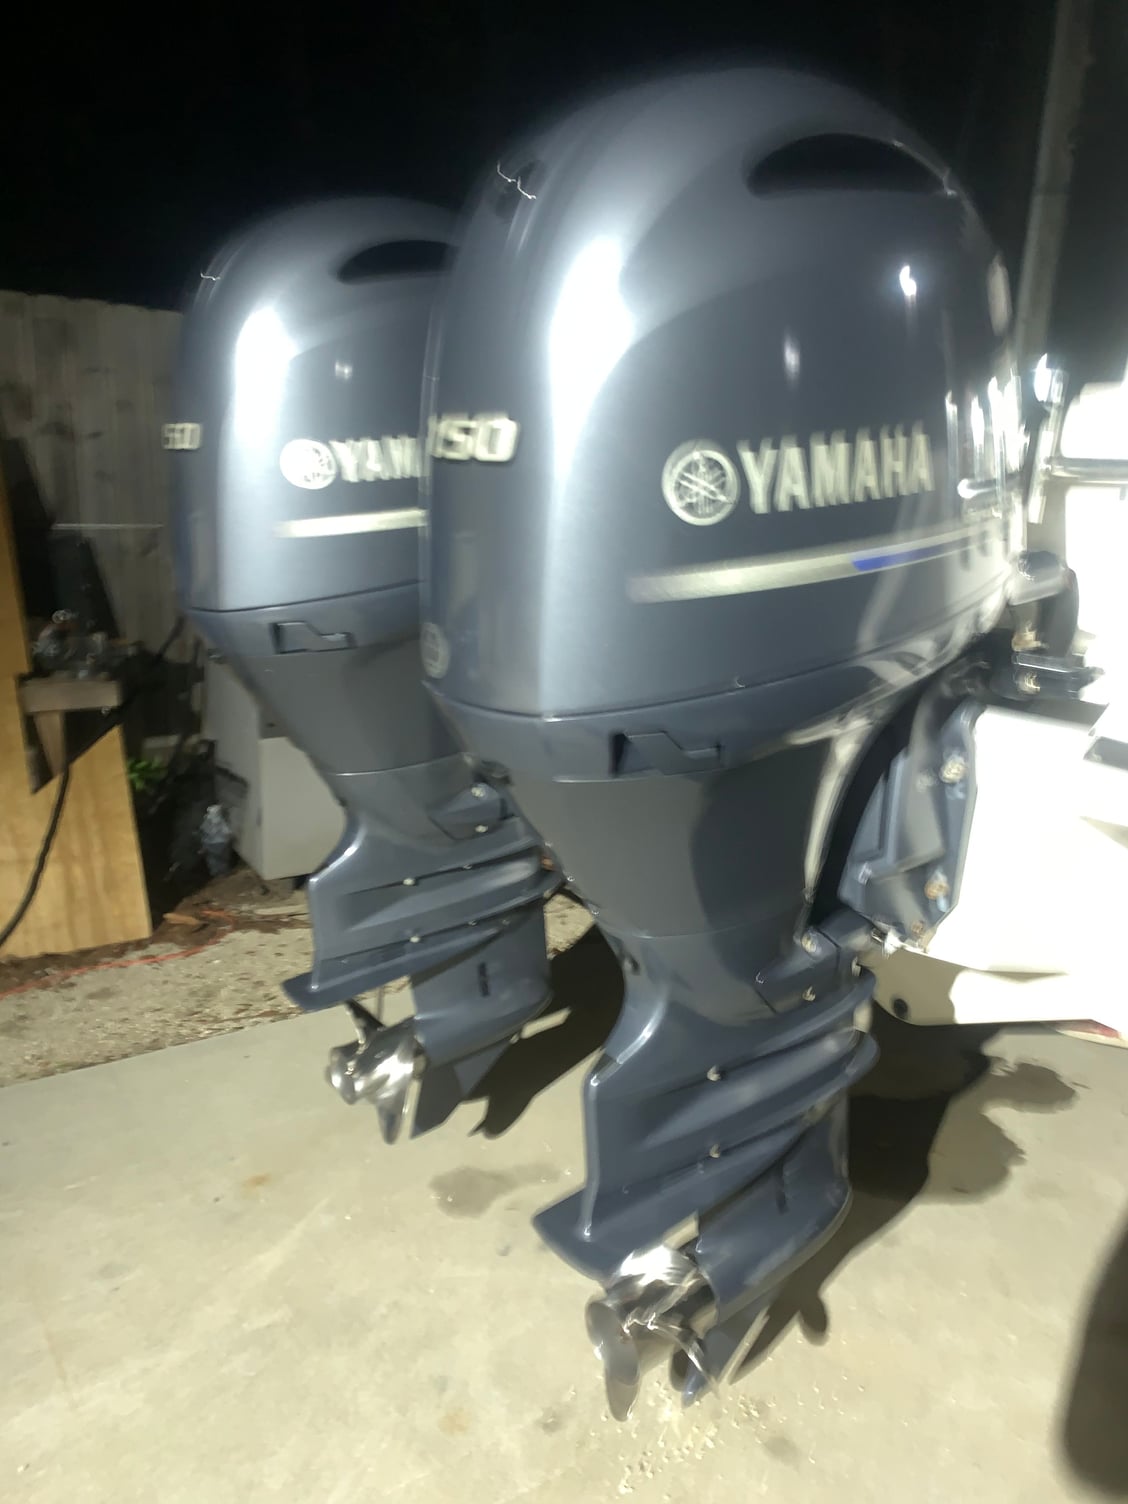 Yamaha outboard serial number missing